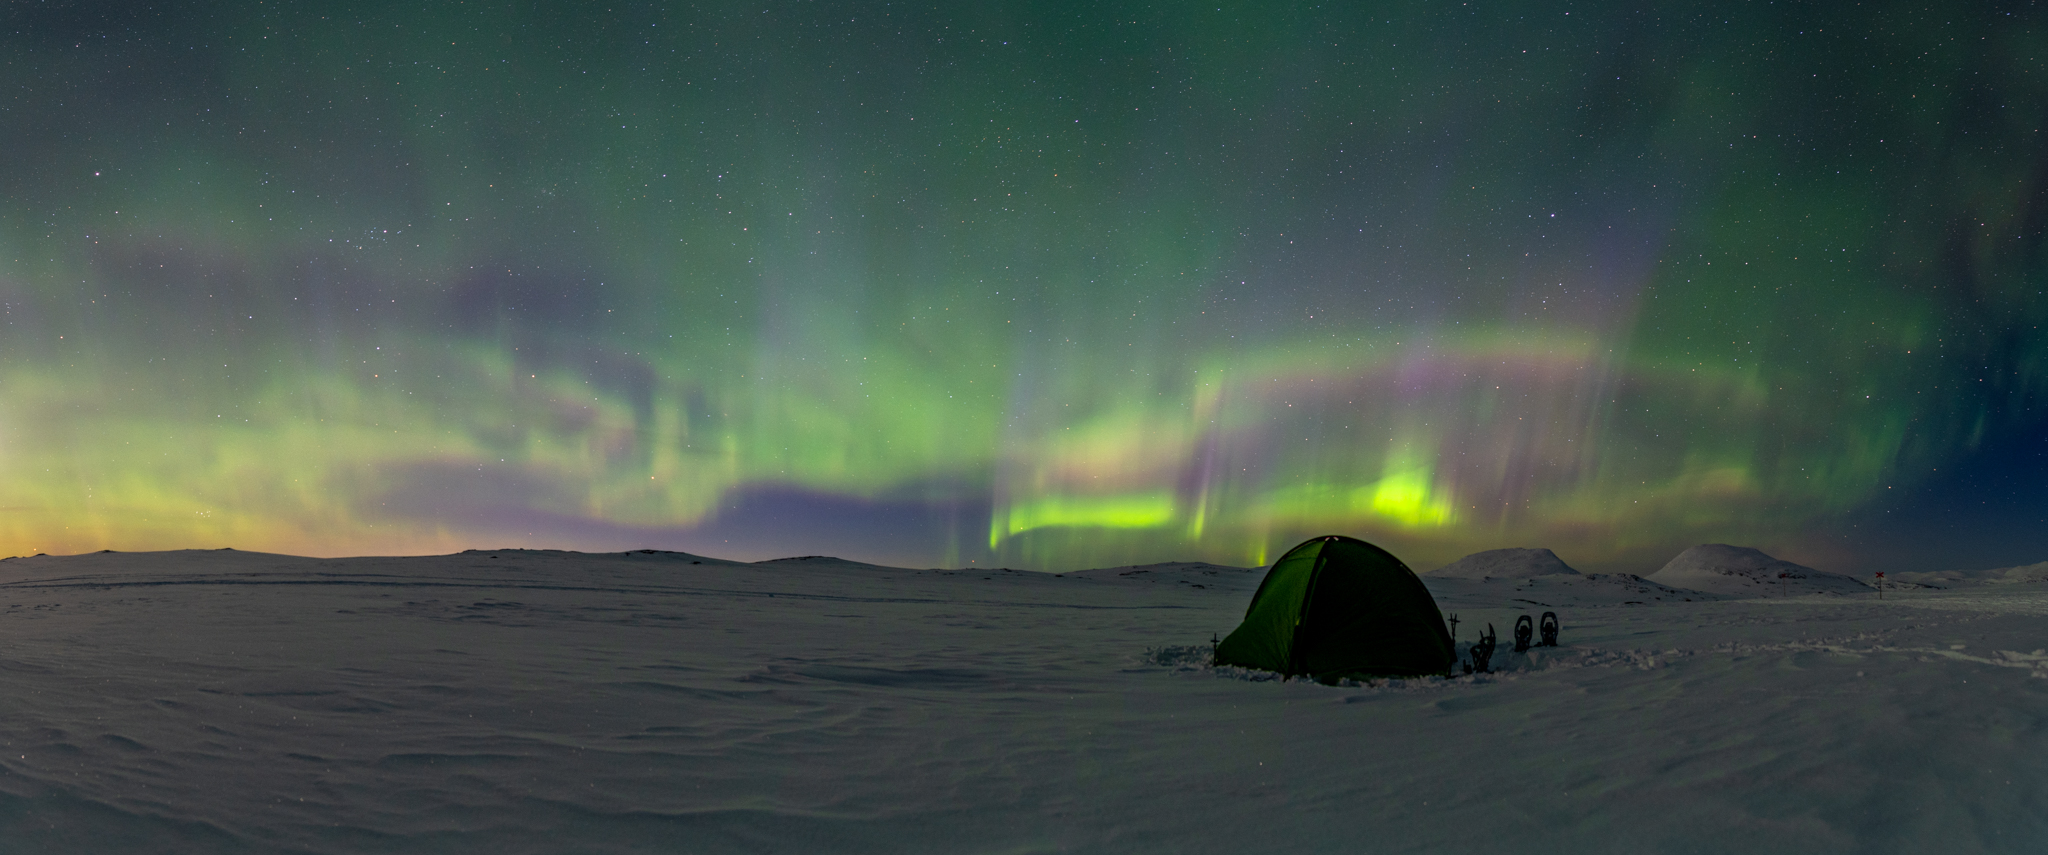 Watching northern lights from tent at Jämtlands Triangel